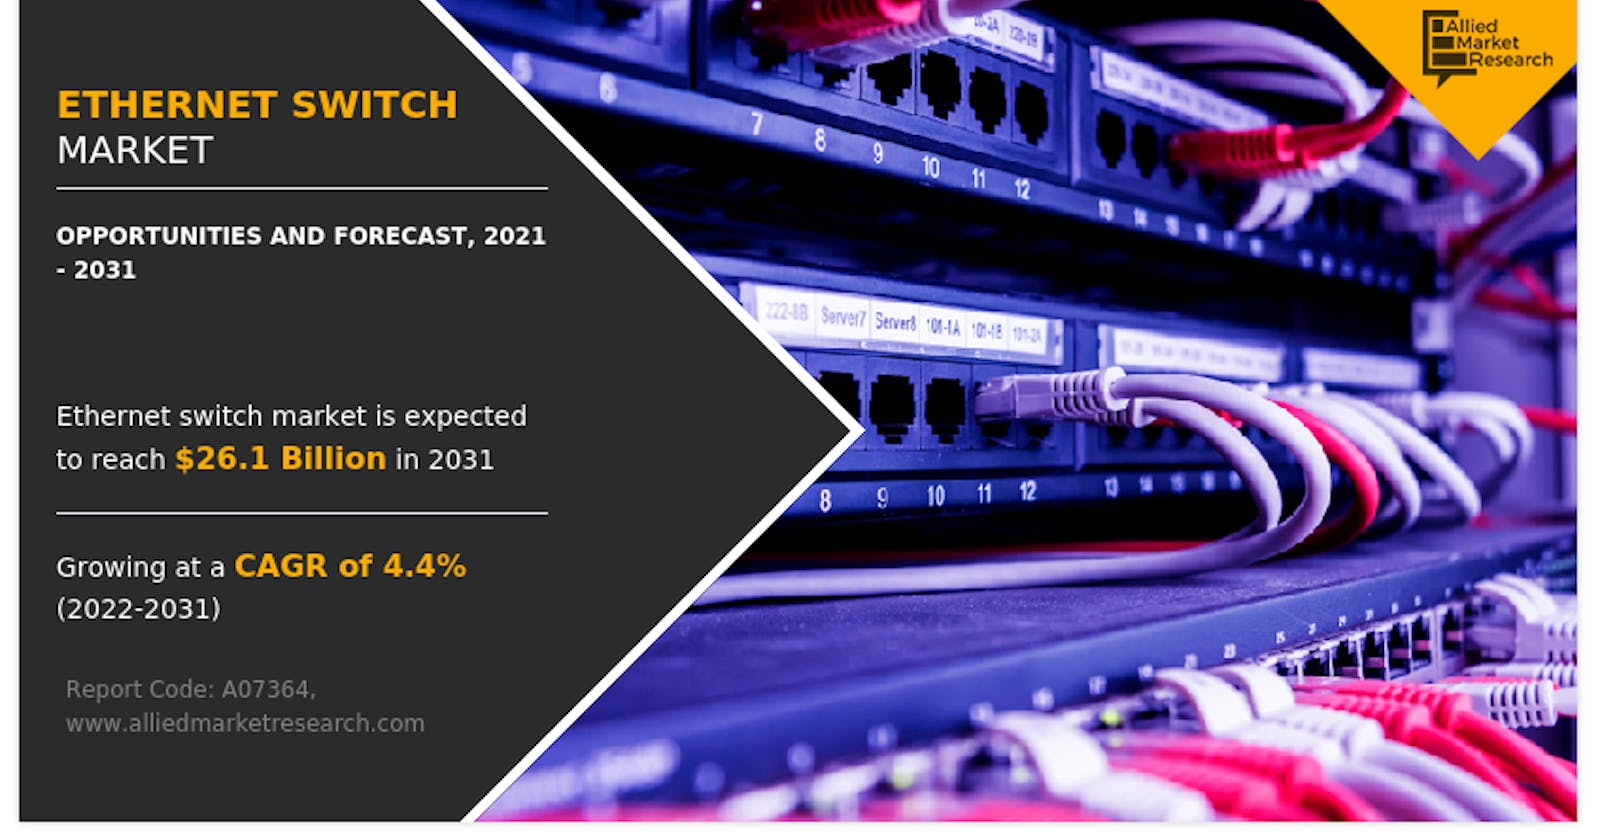 Ethernet Switch Market Trends, Growth Factors and Opportunities 2022-2031